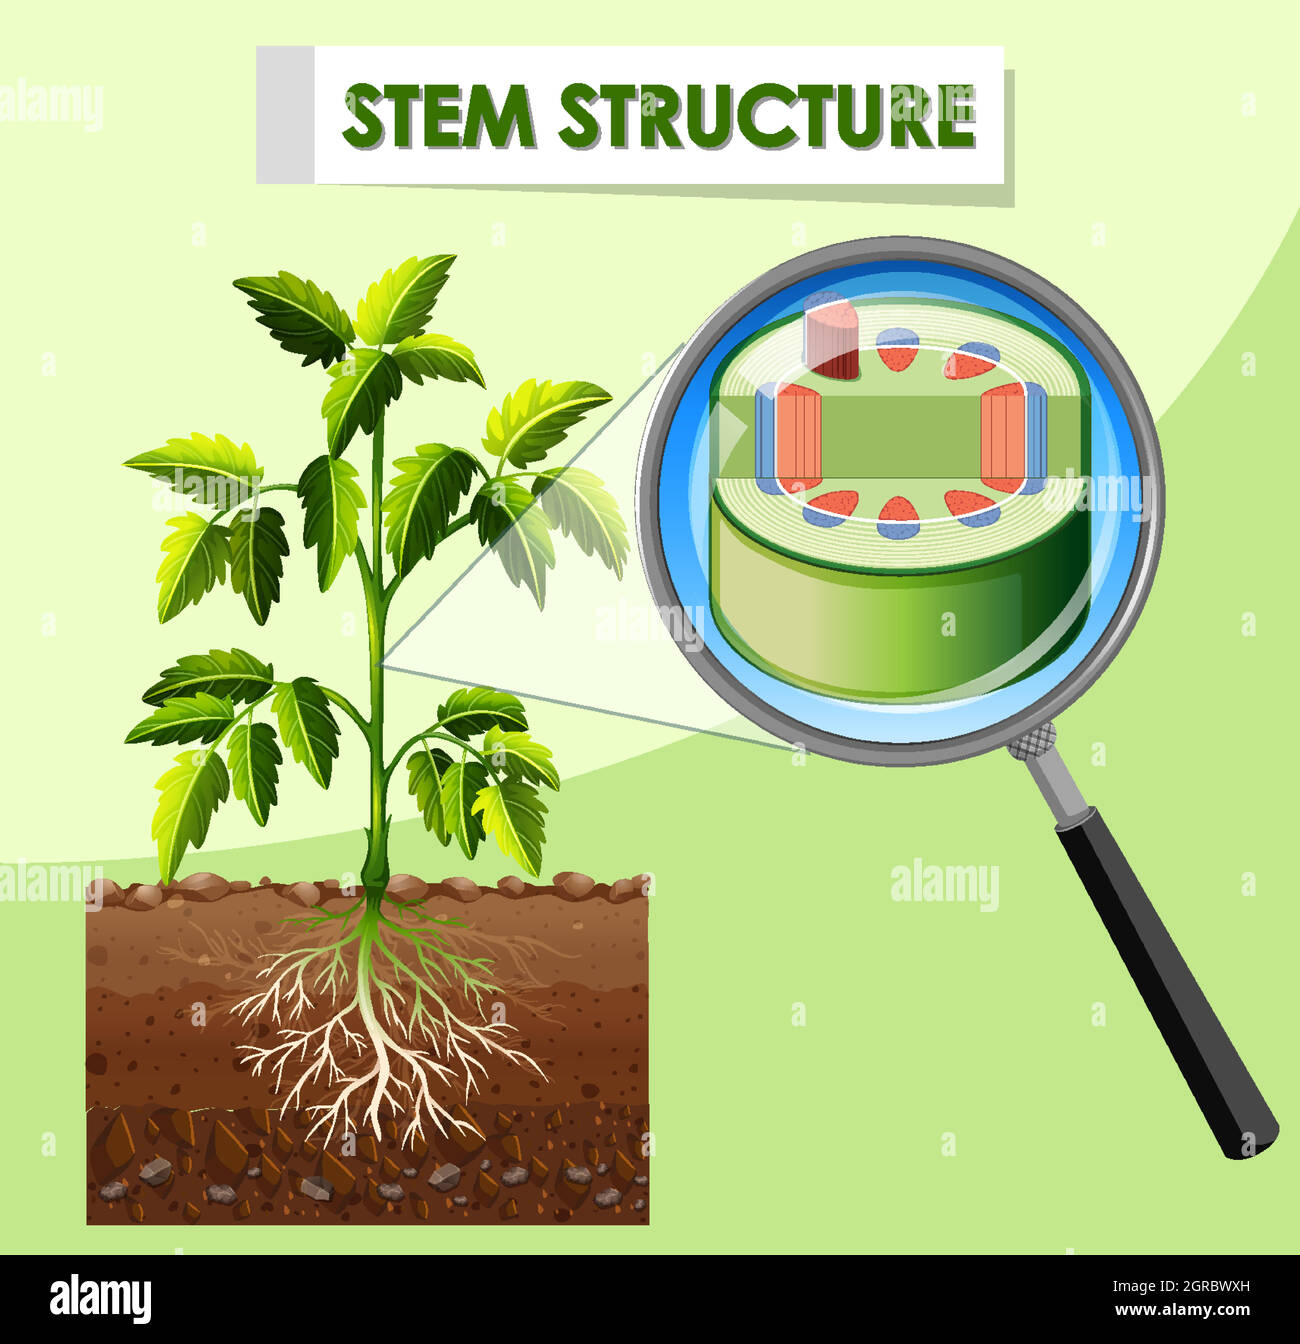 Diagram showing stem structure of plant Stock Vector